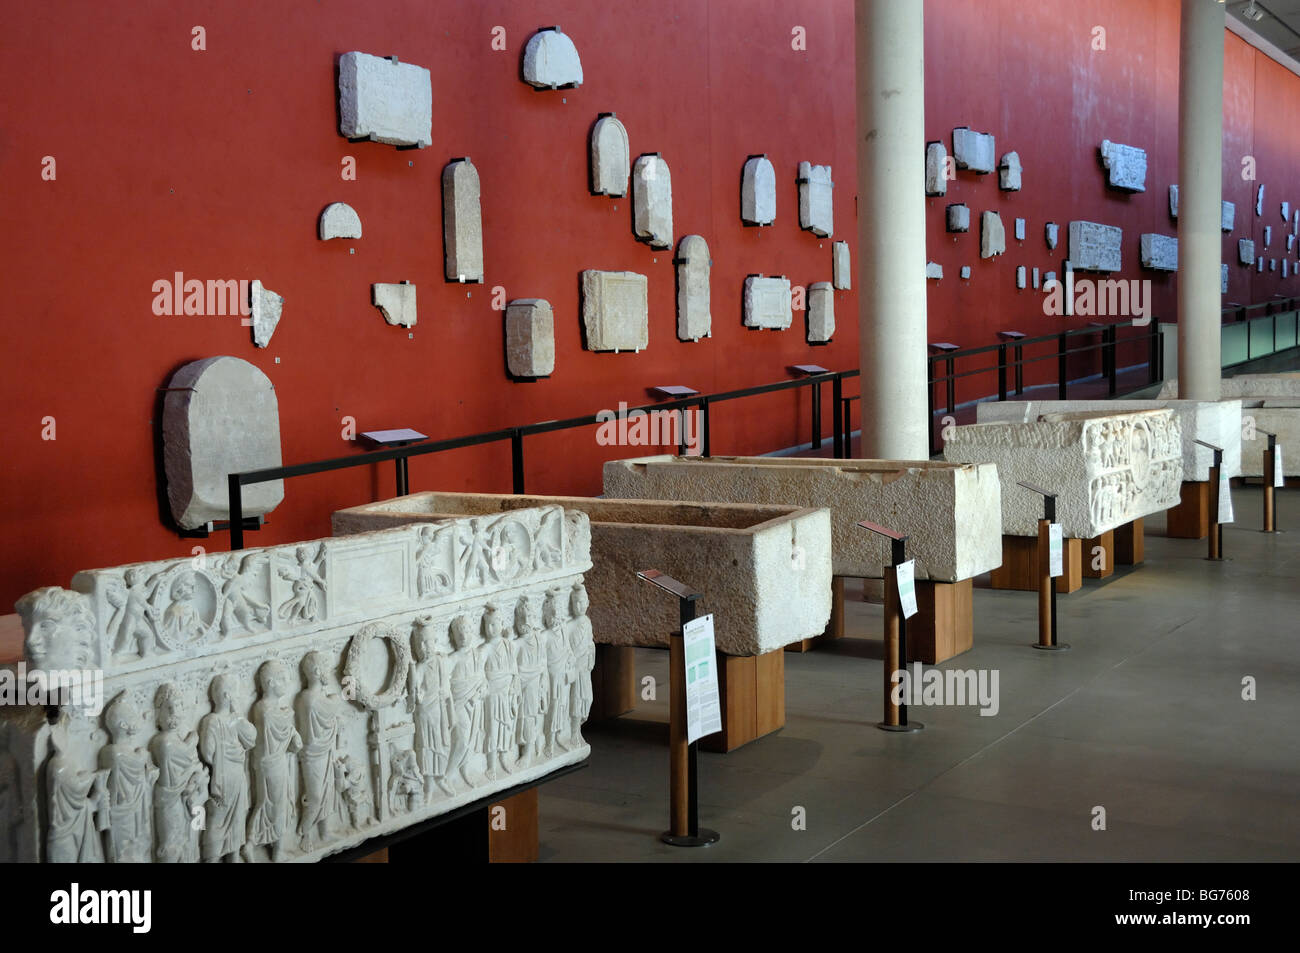 Interior of the Musée de l'Arles Antique, or Arles Antiquity Museum, with Roman Sacrophagii & Antiquities, Arles,Provence,France Stock Photo